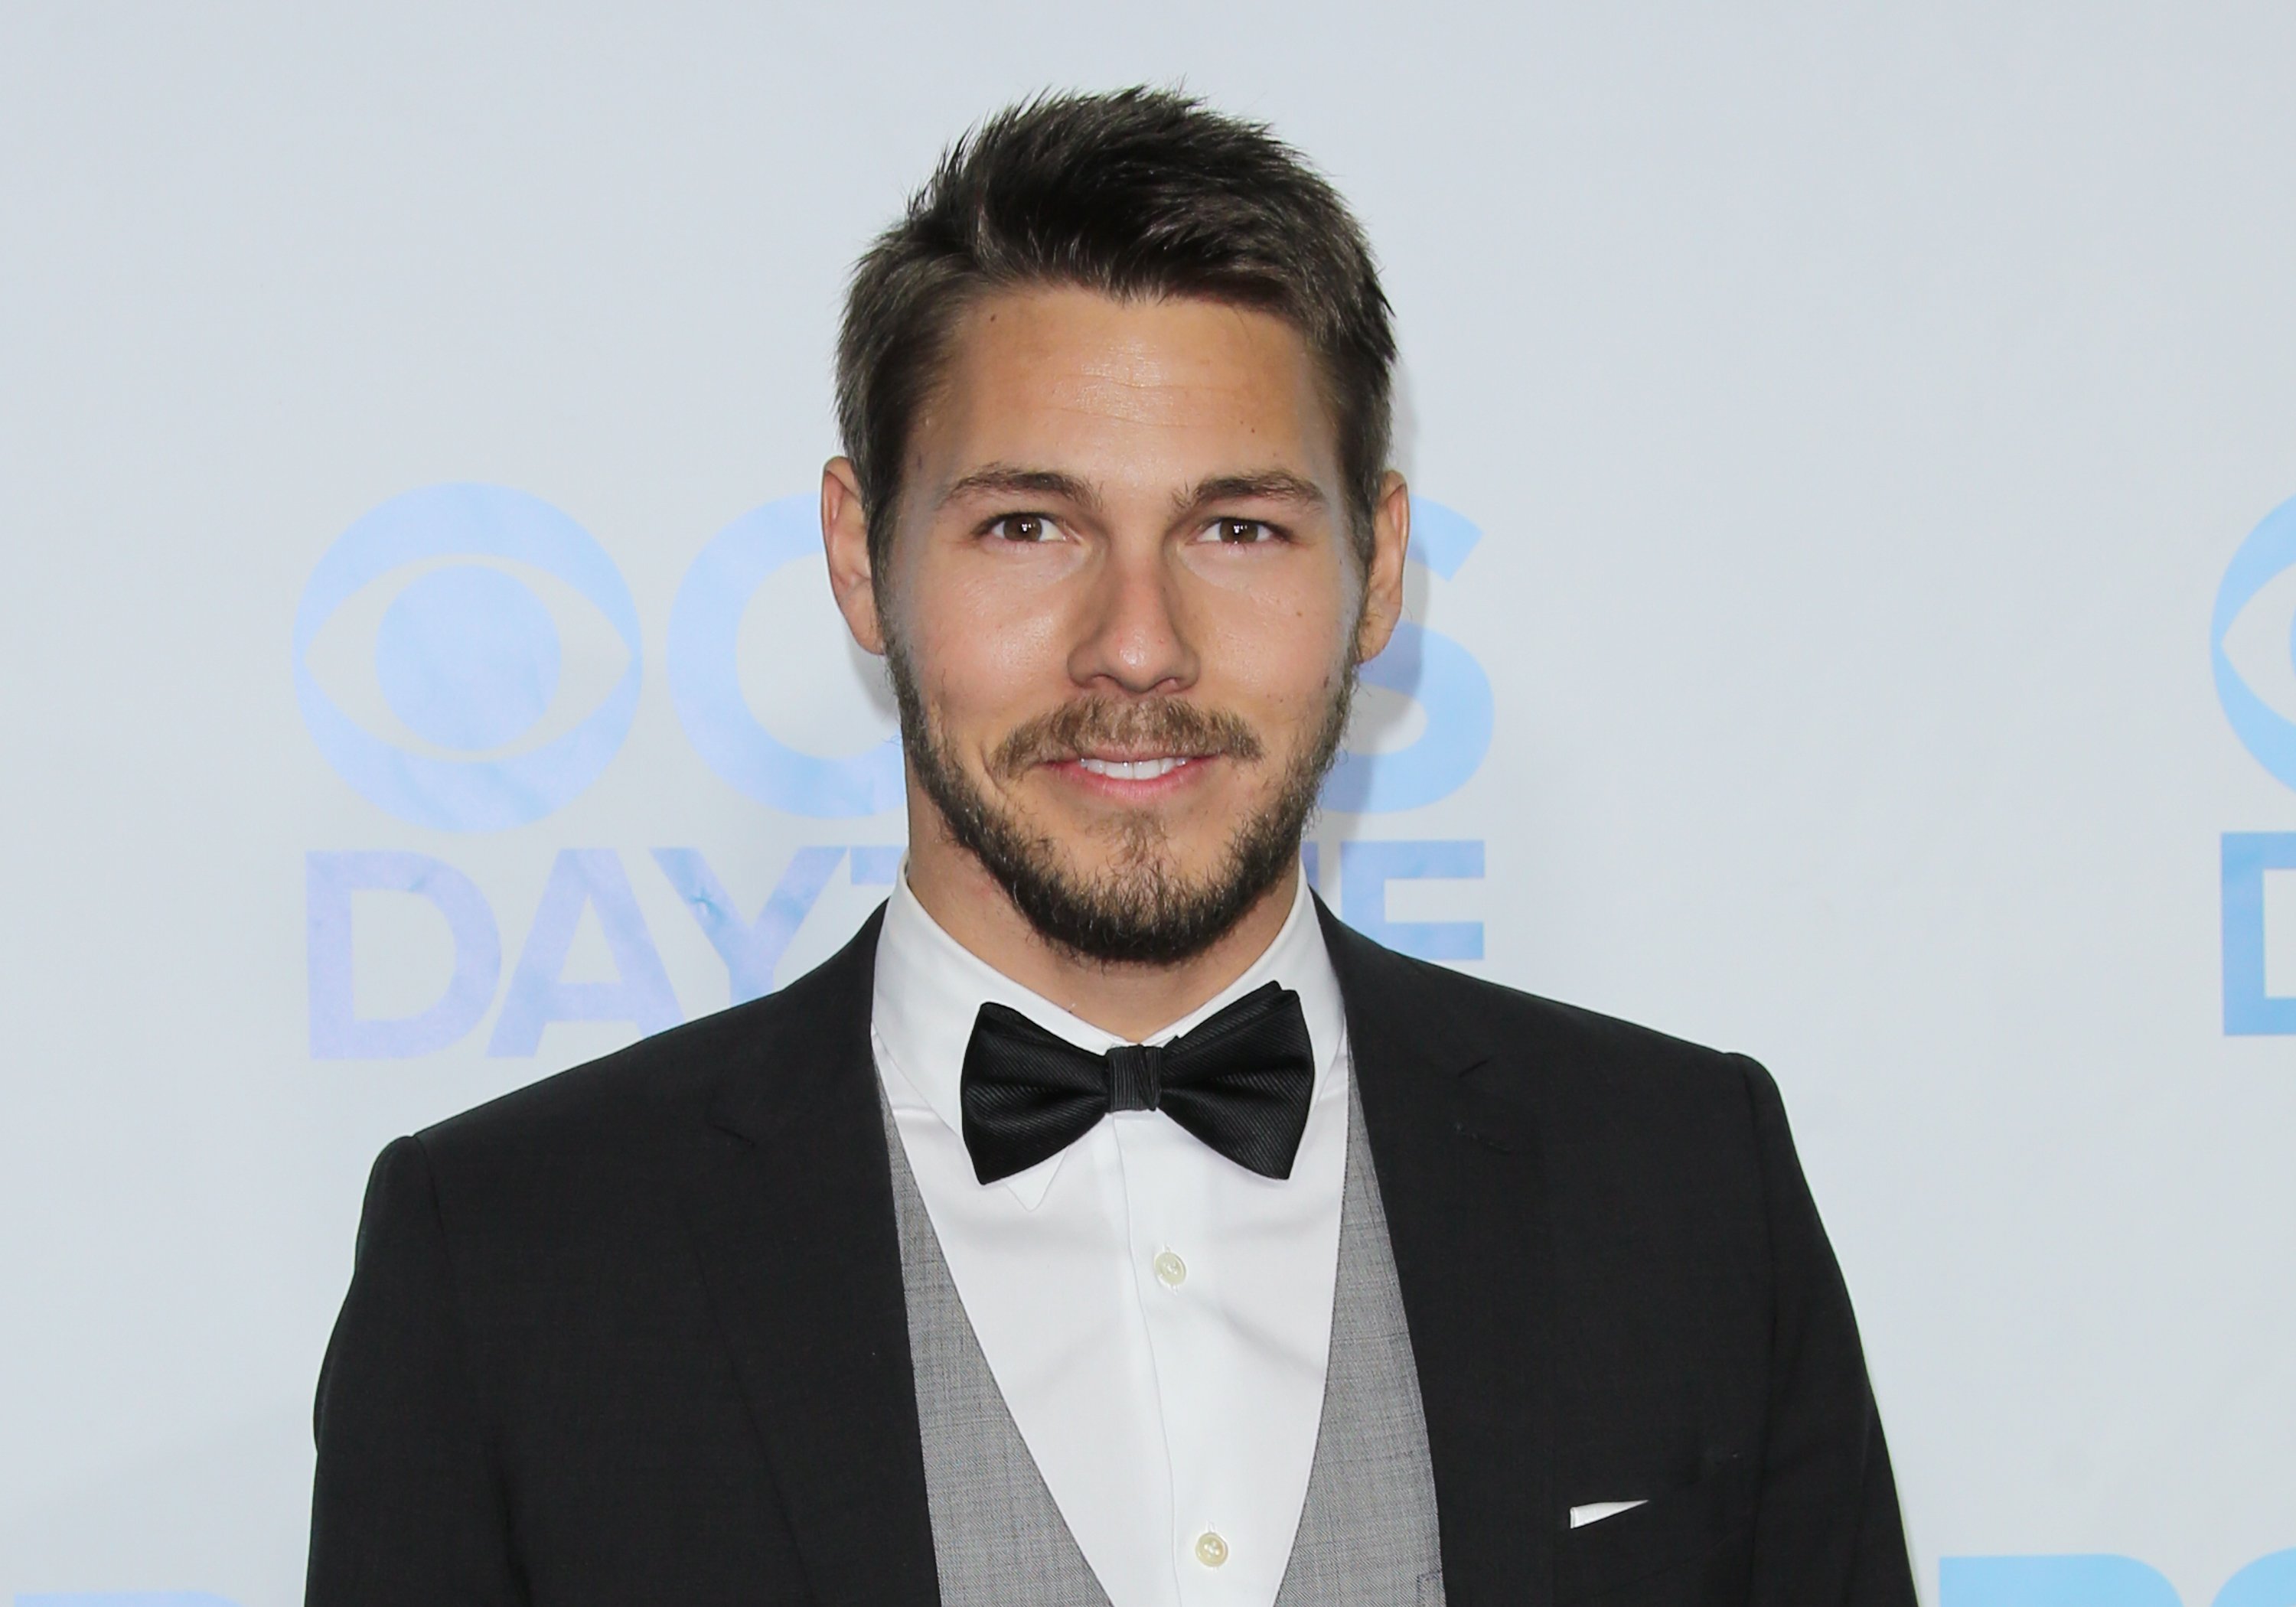 'The Bold and the Beautiful' star Scott Clifton dressed in a tuxedo poses for a photo during the show's anniversary celebration.